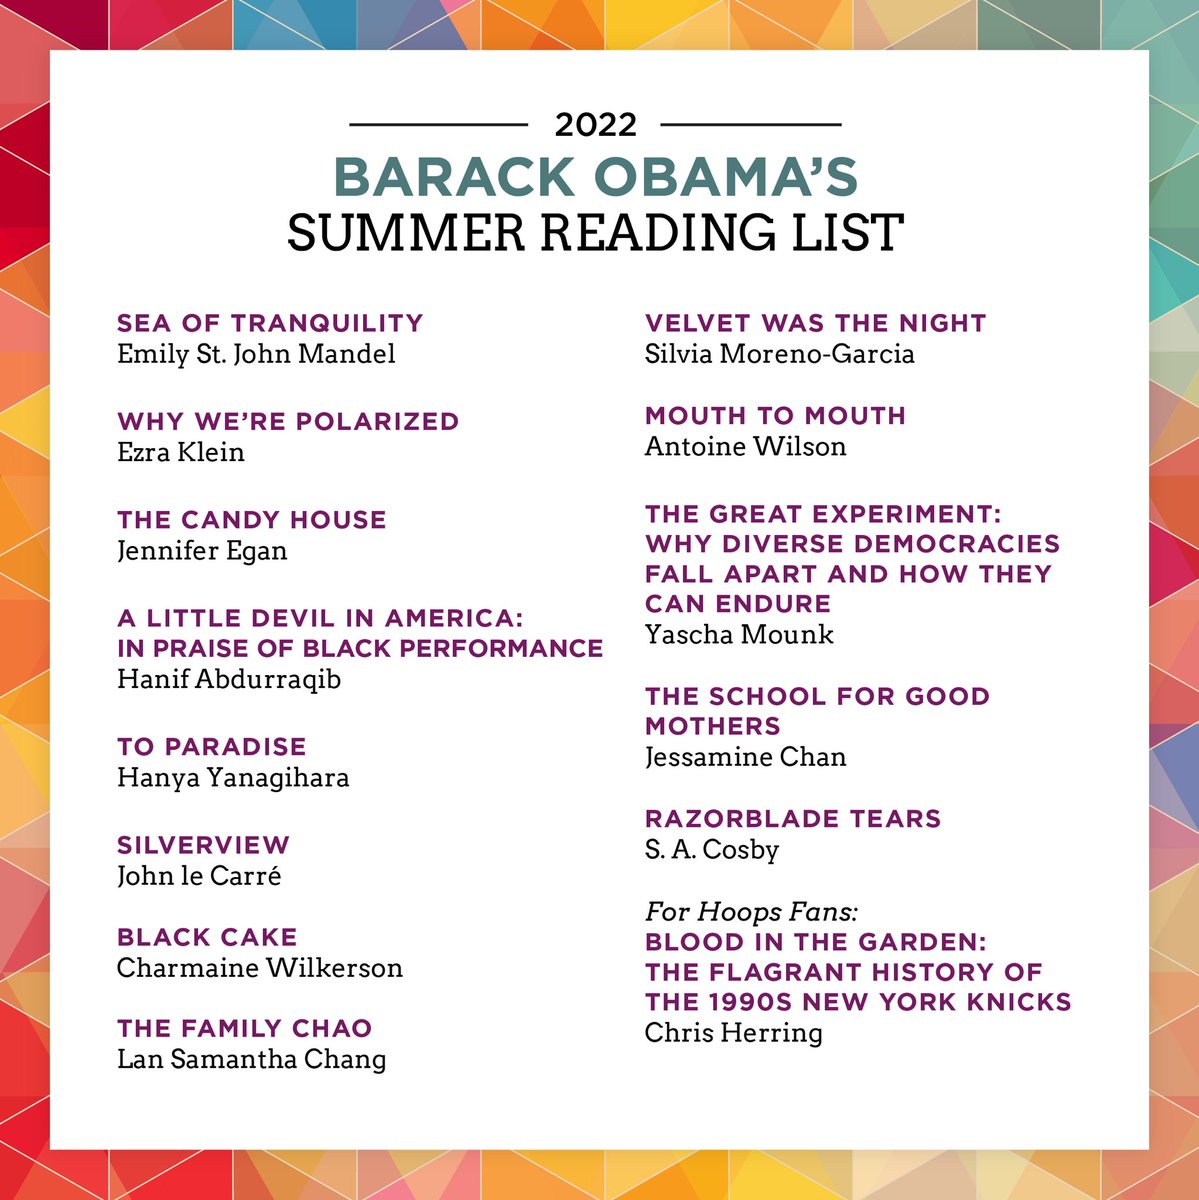 I’ve read a couple of great books this year and wanted to share some of my favorites so far. What have you been reading this summer?